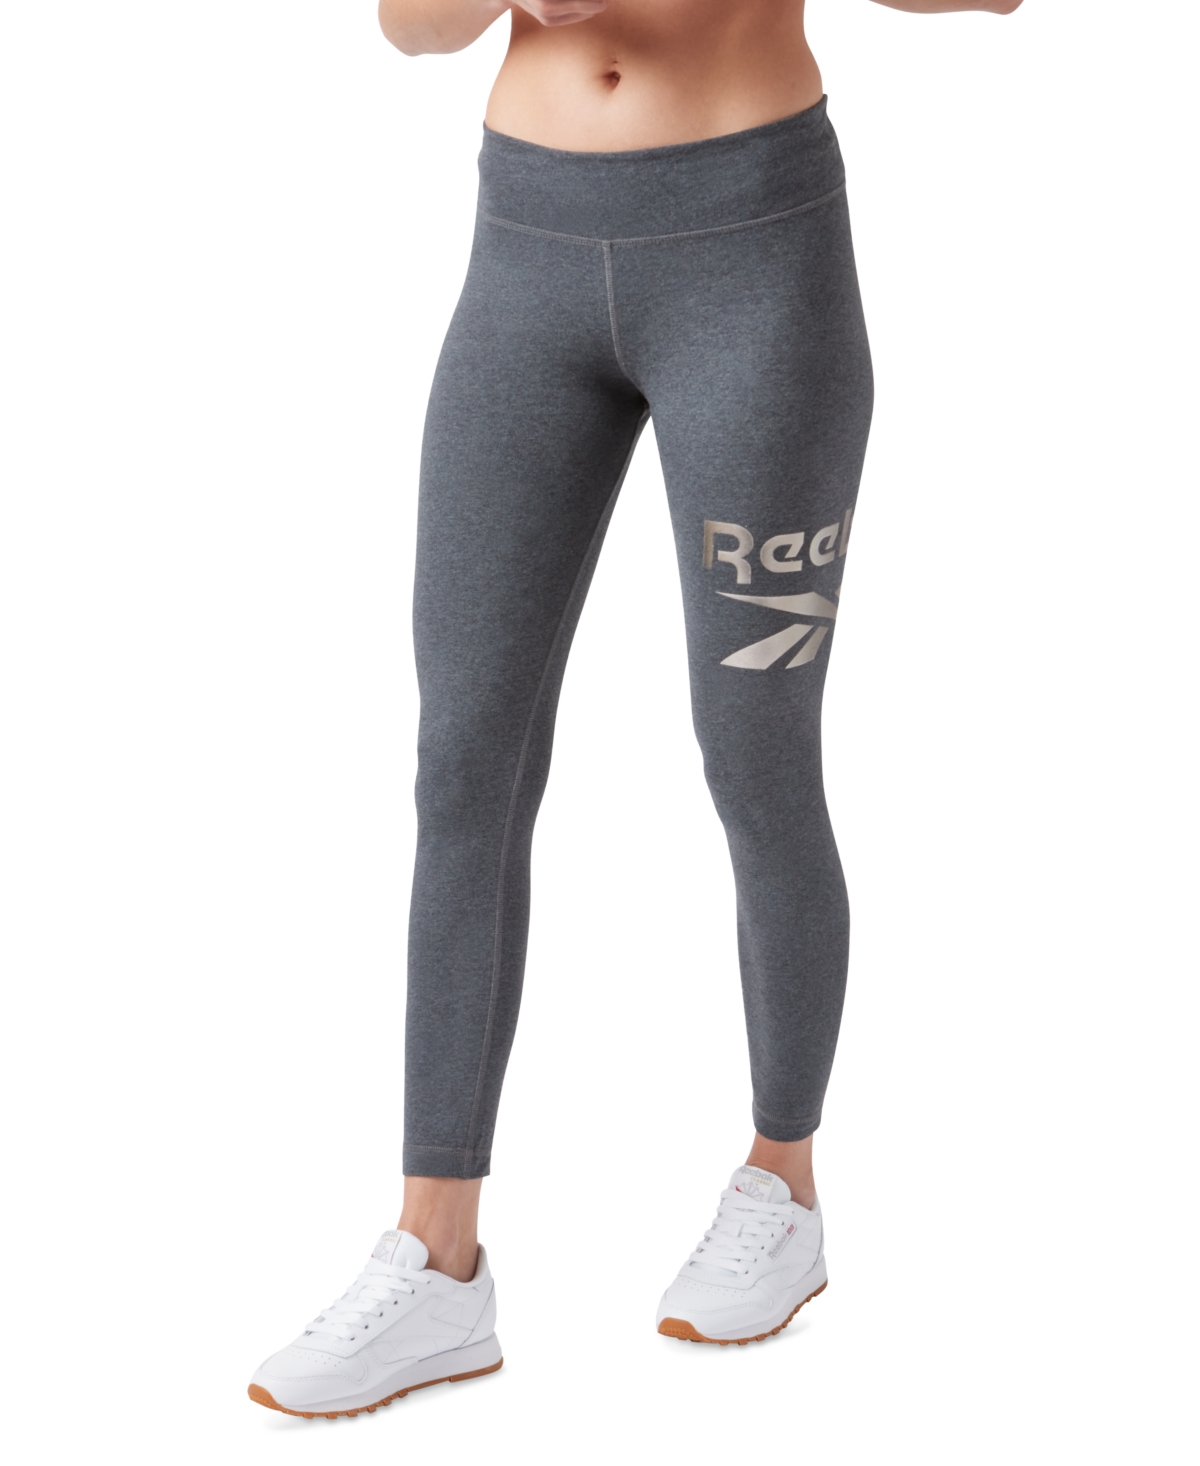 Reebok Women's Pull-On Drawstring Tricot Pants, A Macy's Exclusive